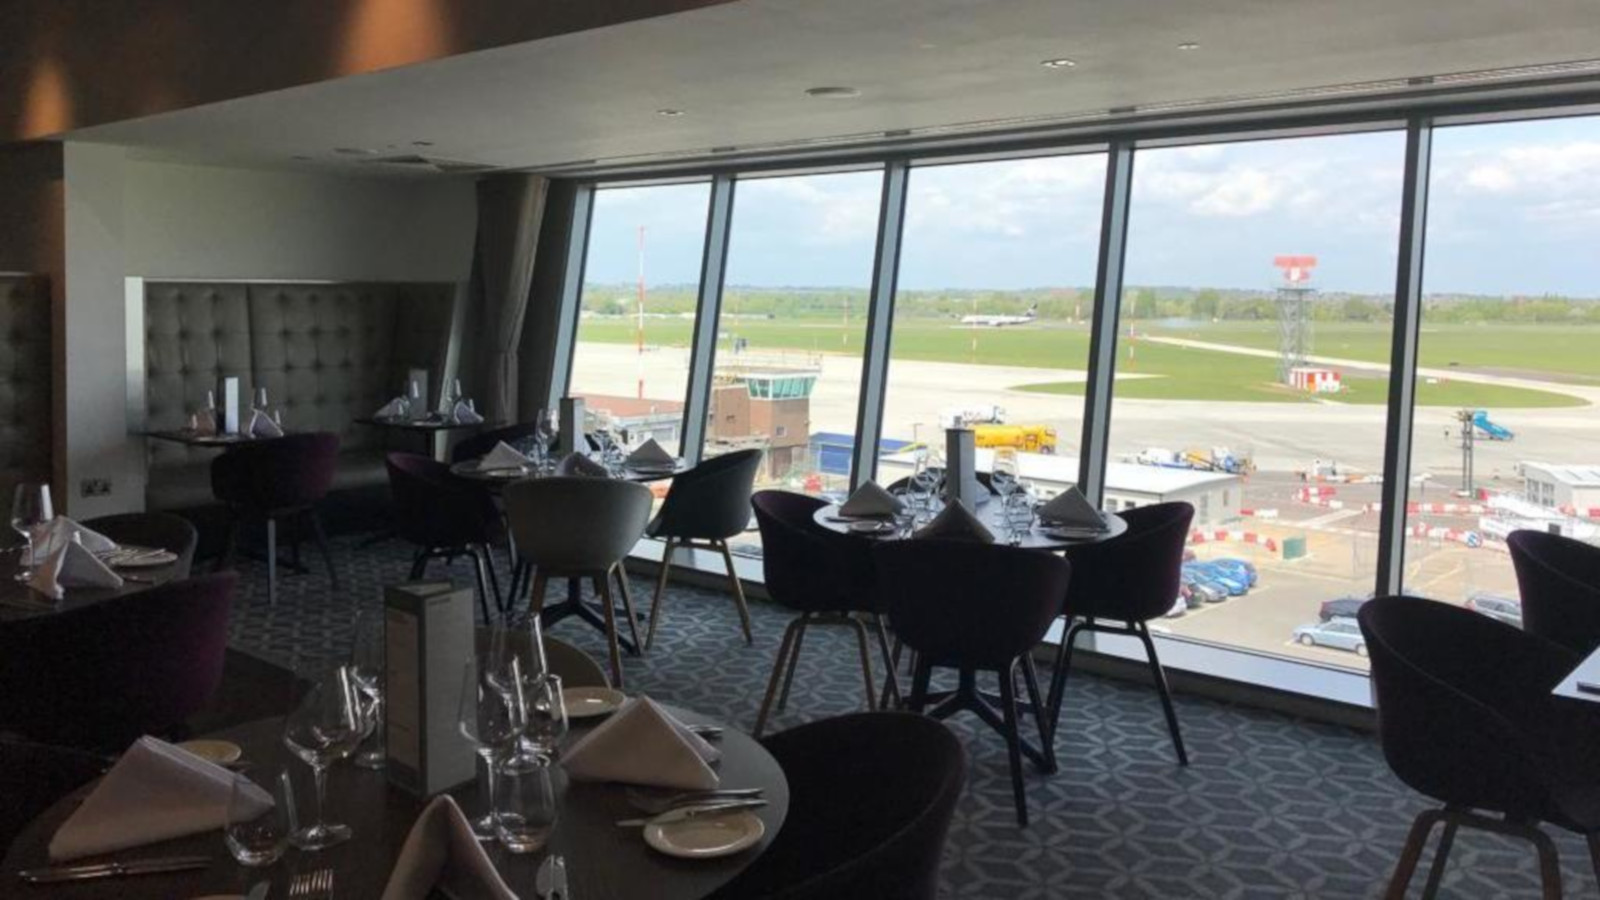 Holiday Inn Southend restaurant with view of airport